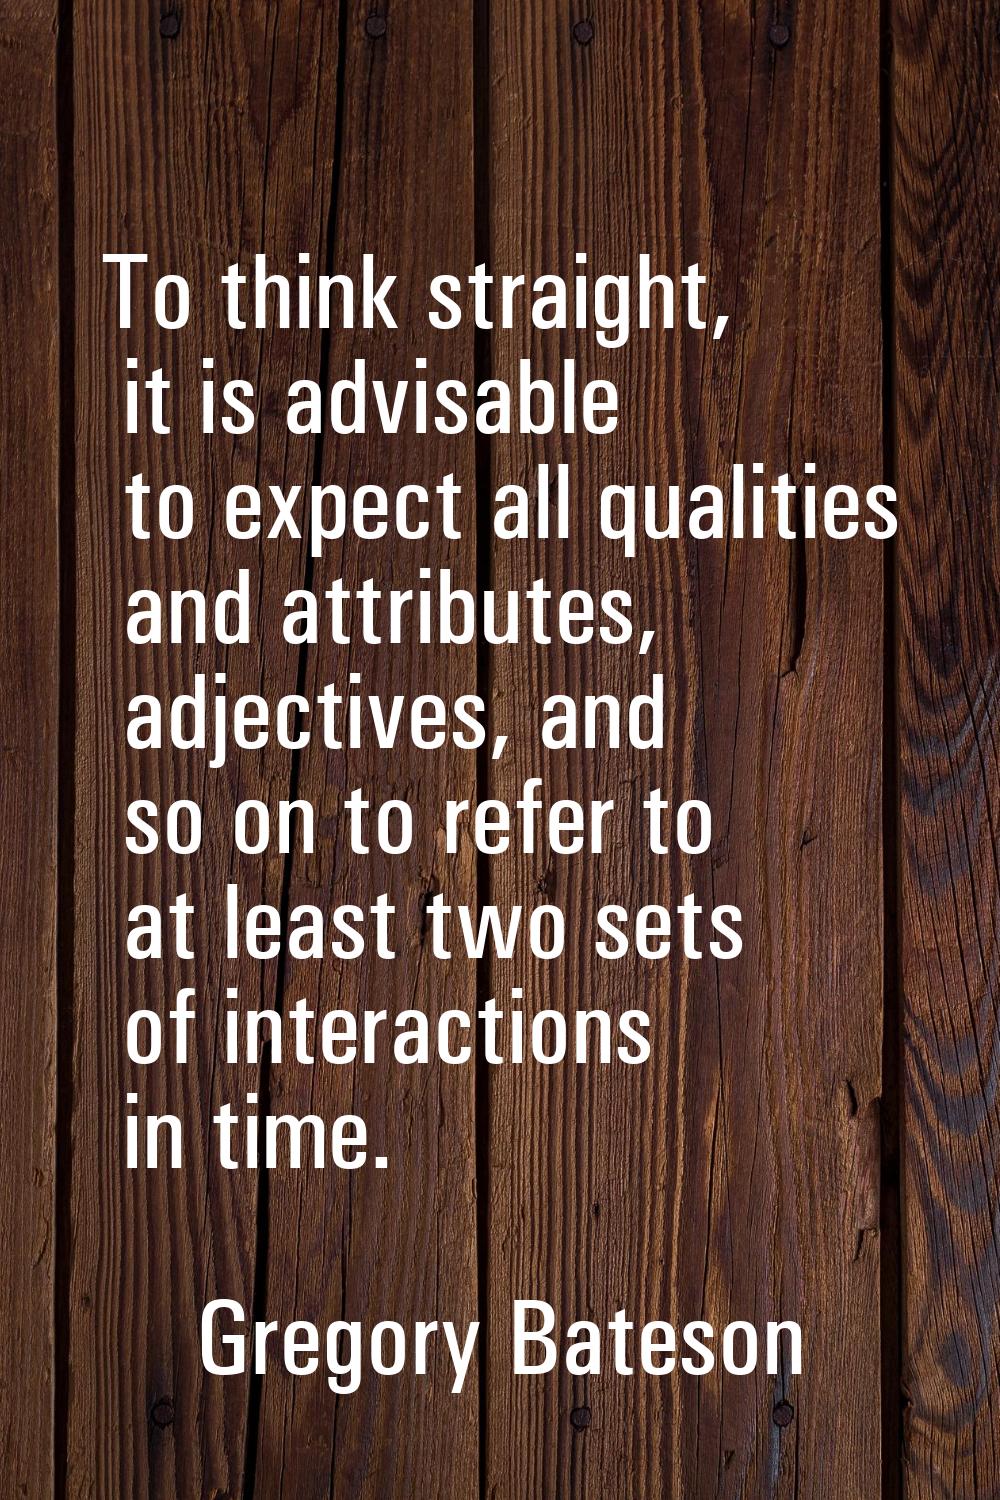 To think straight, it is advisable to expect all qualities and attributes, adjectives, and so on to